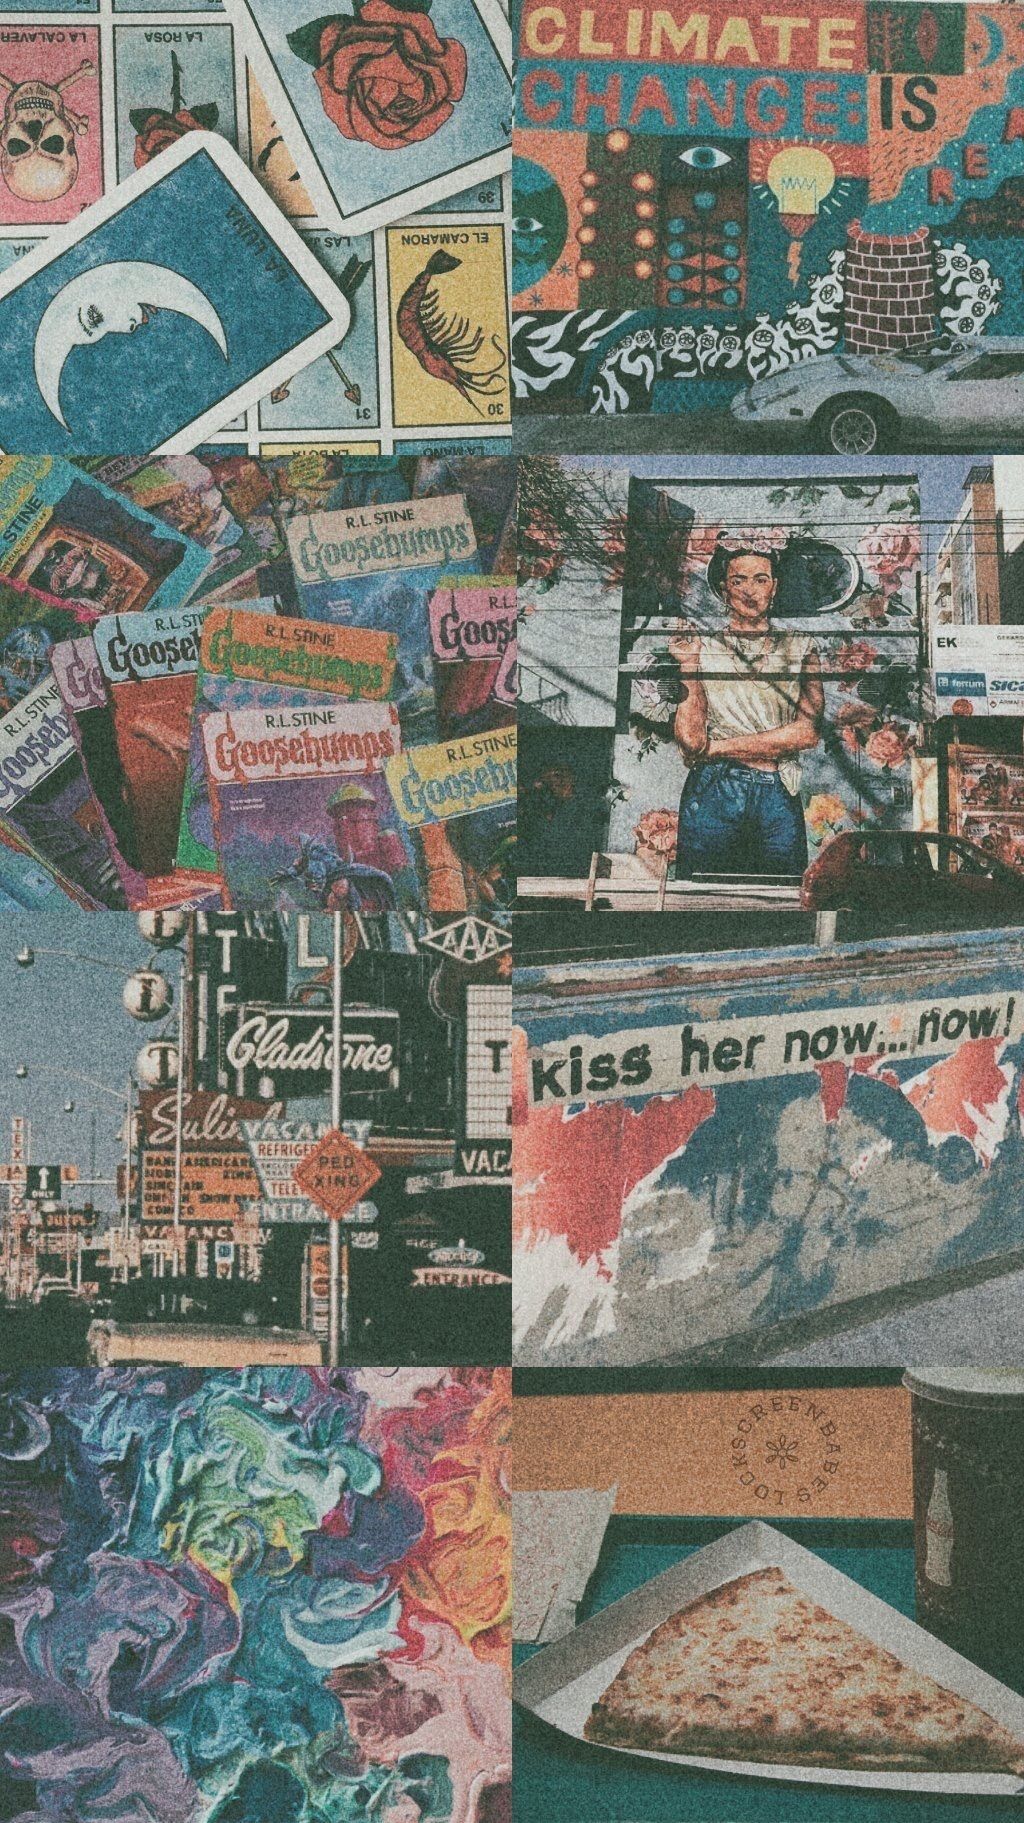 Vintage Backgrounds For Iphone